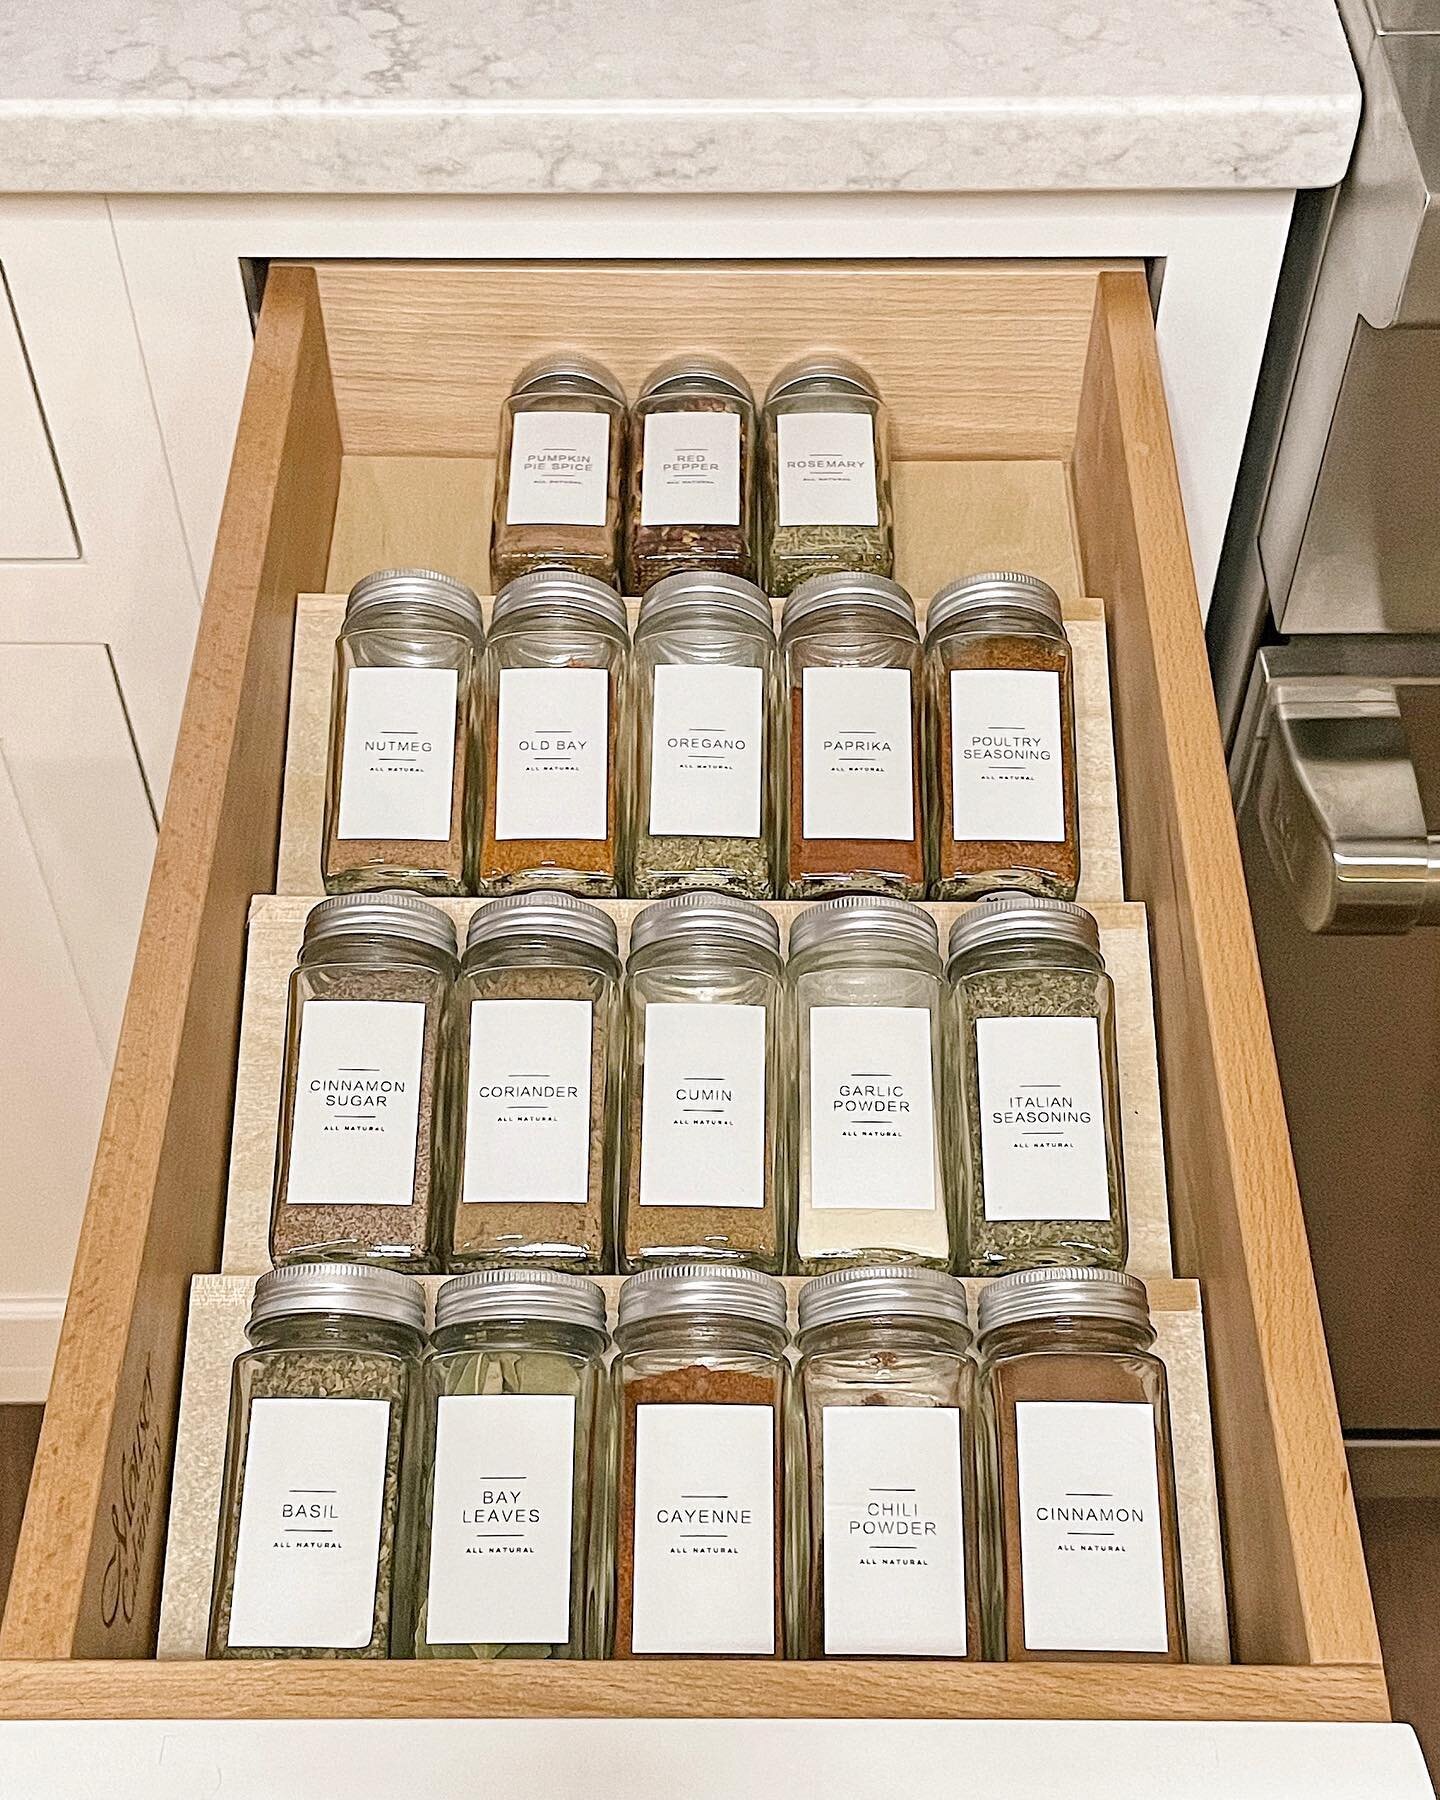 The ease of a cohesive spice drawer✨

Decanting spices may take some time up front, but in day to day/week to week life it requires less maintenance- think about how quickly you go thru a spice jar vs a bag of chips or box of a pasta. Also, let&rsquo